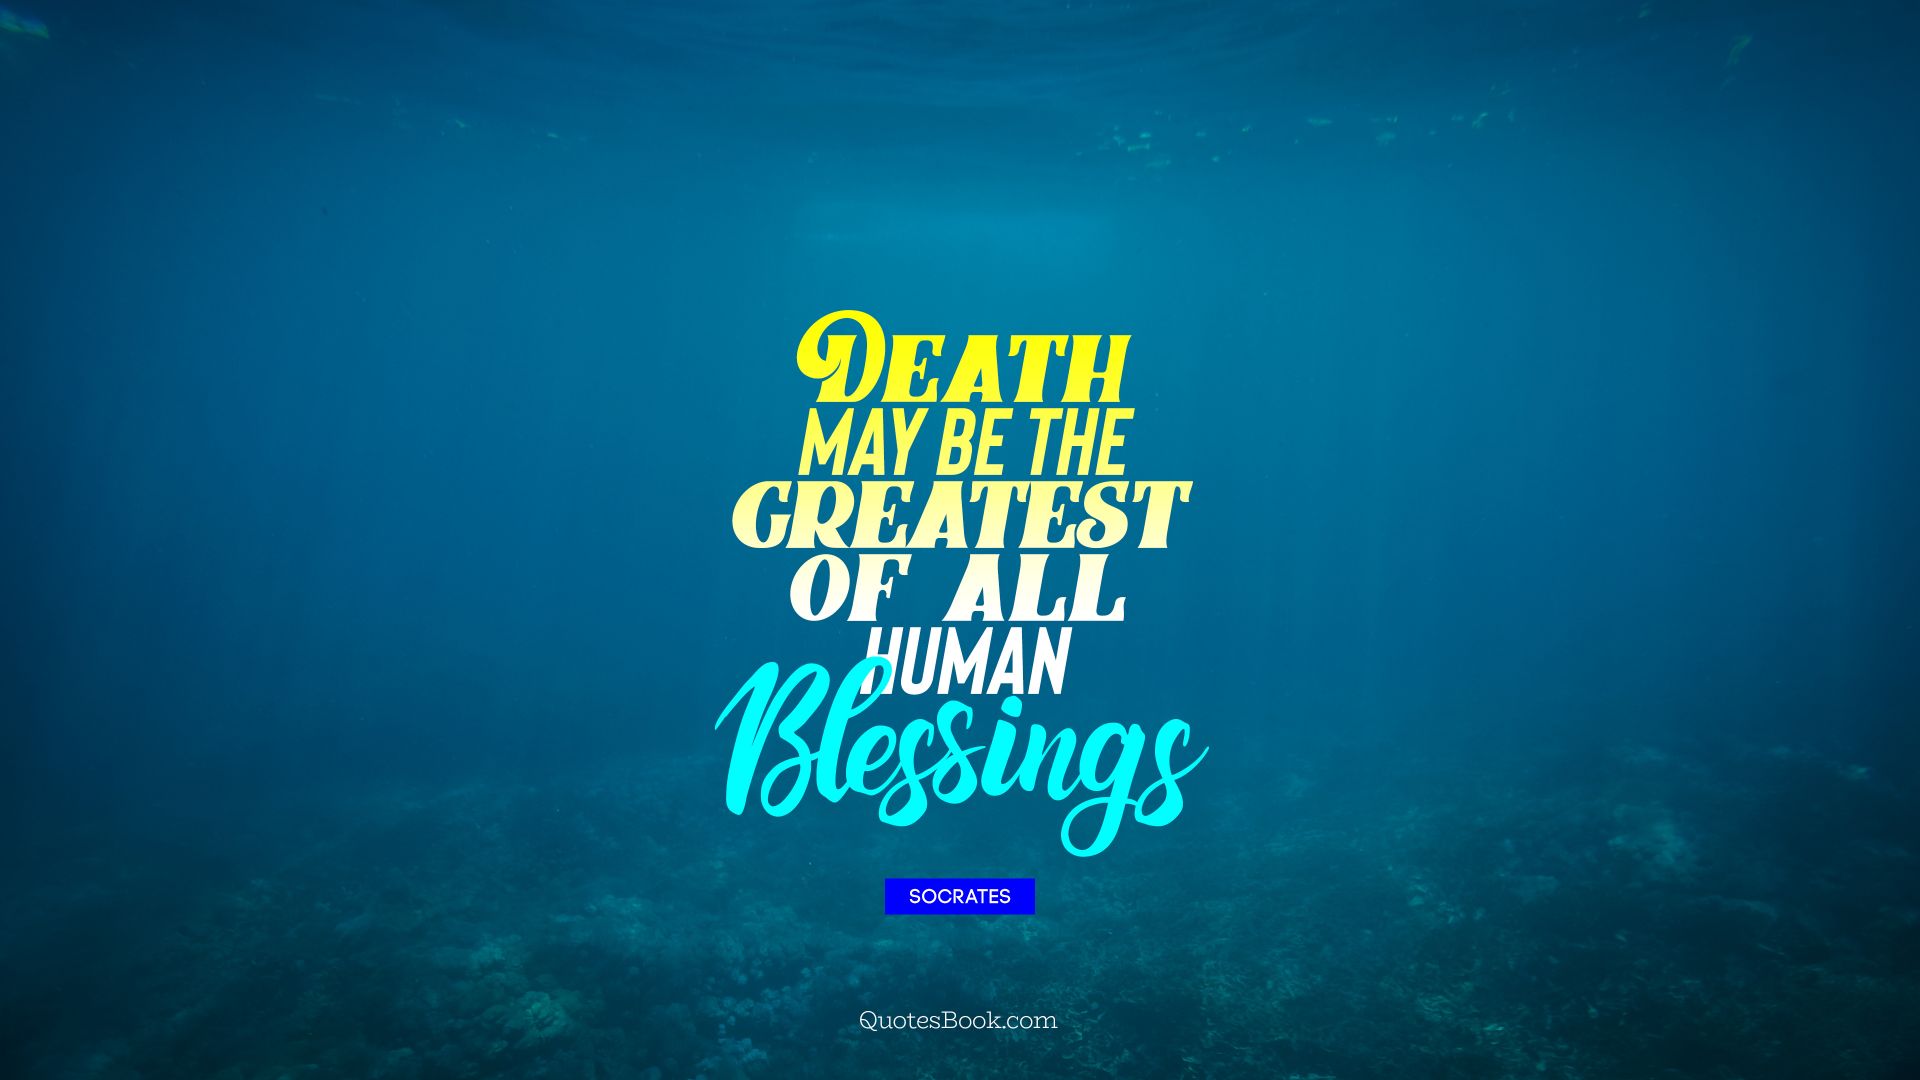 Death may be the greatest of all         human Blessings. - Quote by Socrates